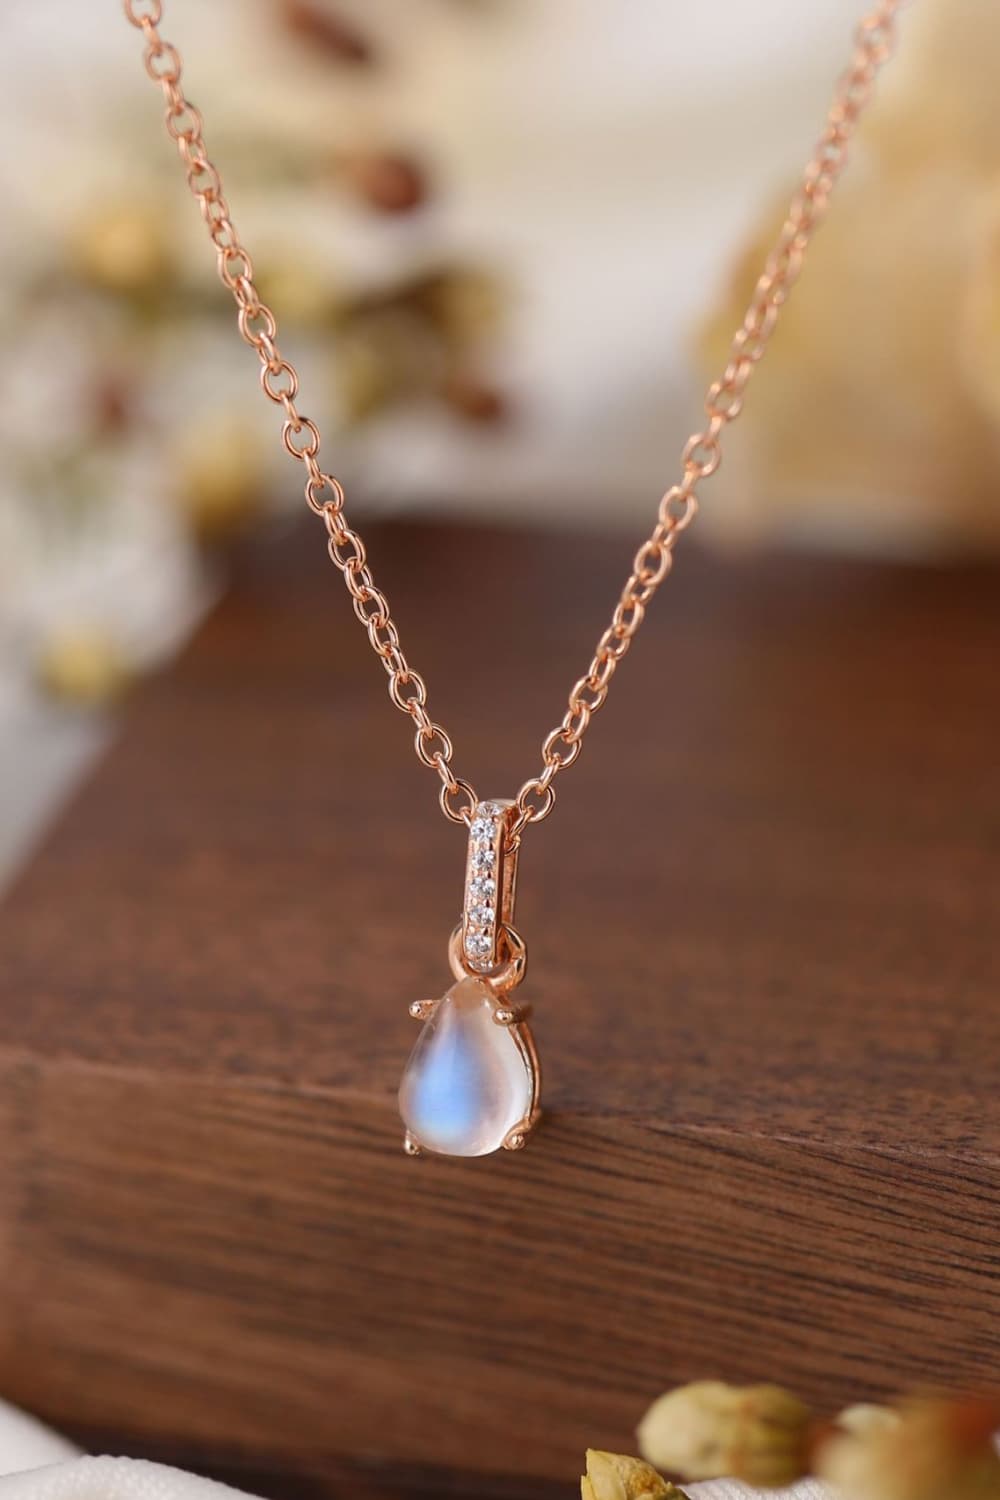 Dark Olive Green High Quality Natural Moonstone Teardrop Pendant 925 Sterling Silver Necklace Sentient Beauty Fashions jewelry